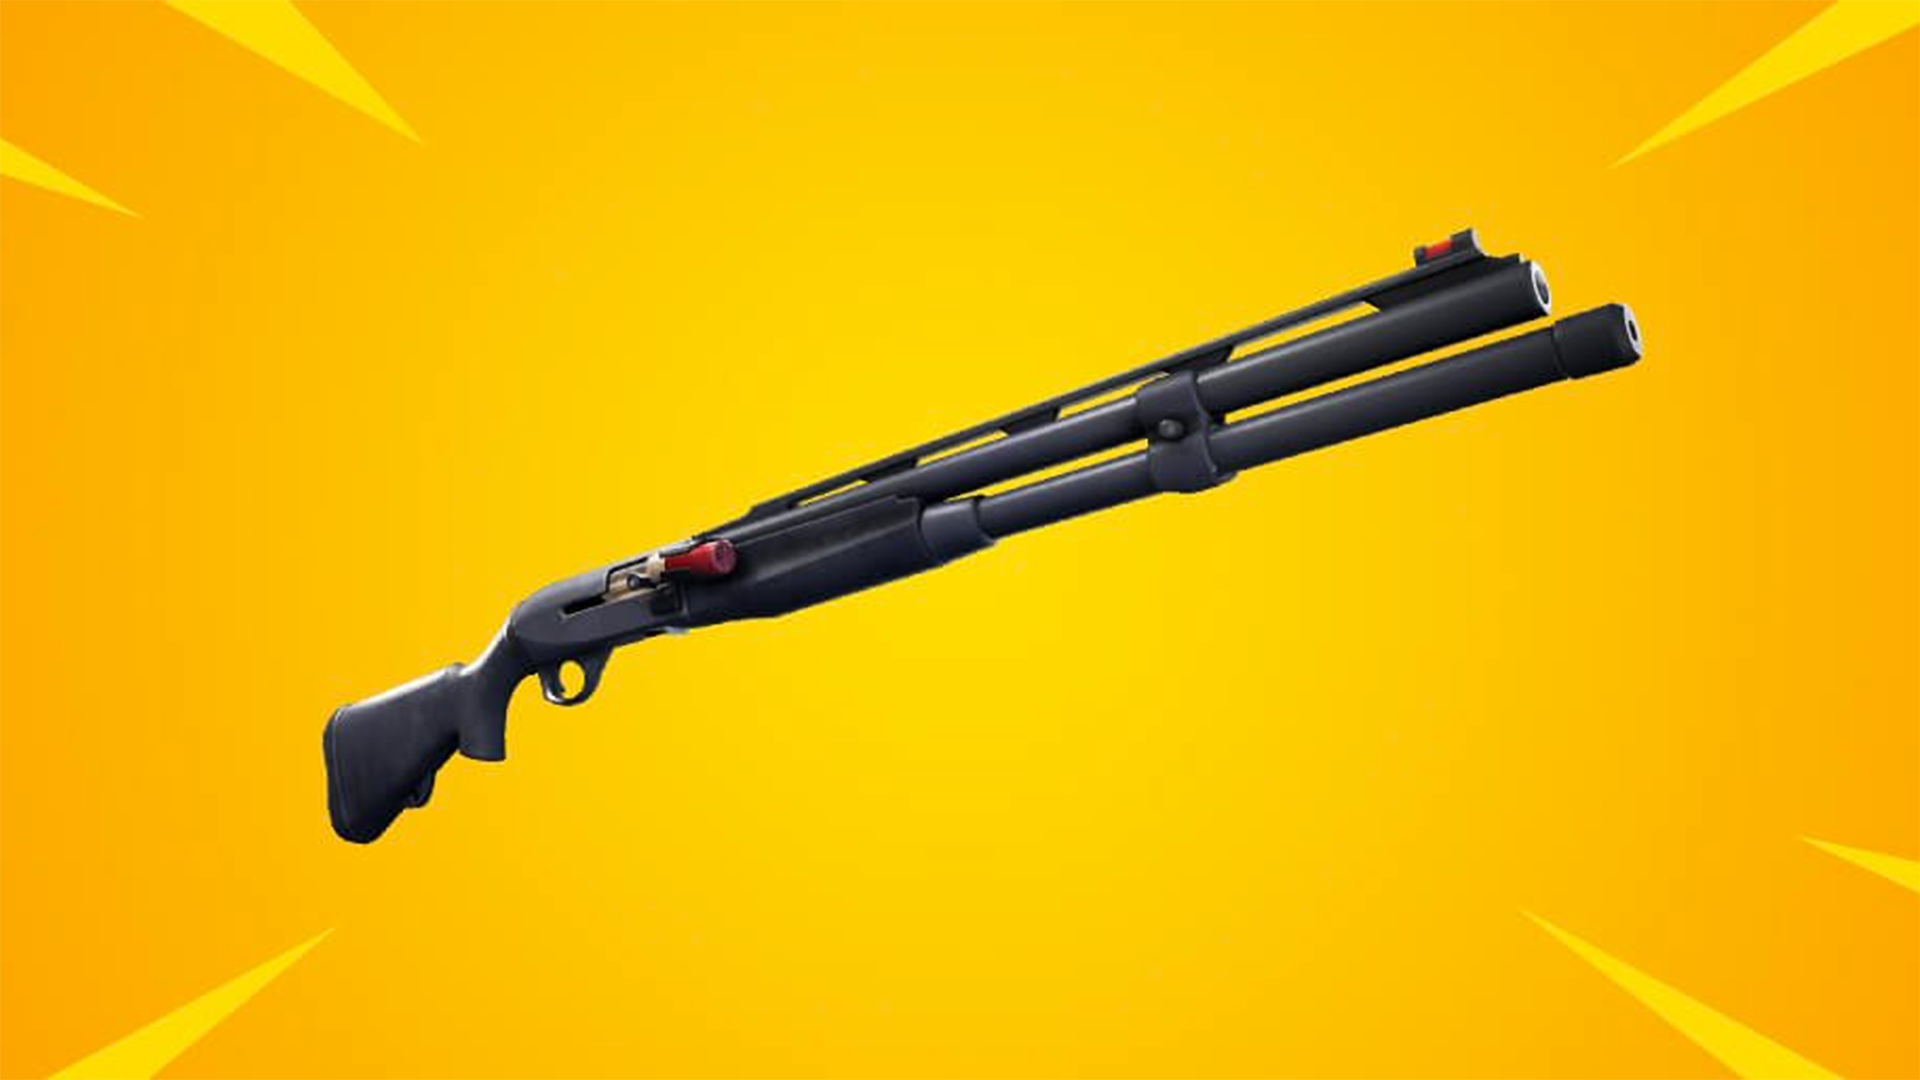 Epic Vaulted The Pump Shotgun And 'Fortnite' Players Are Not Happy